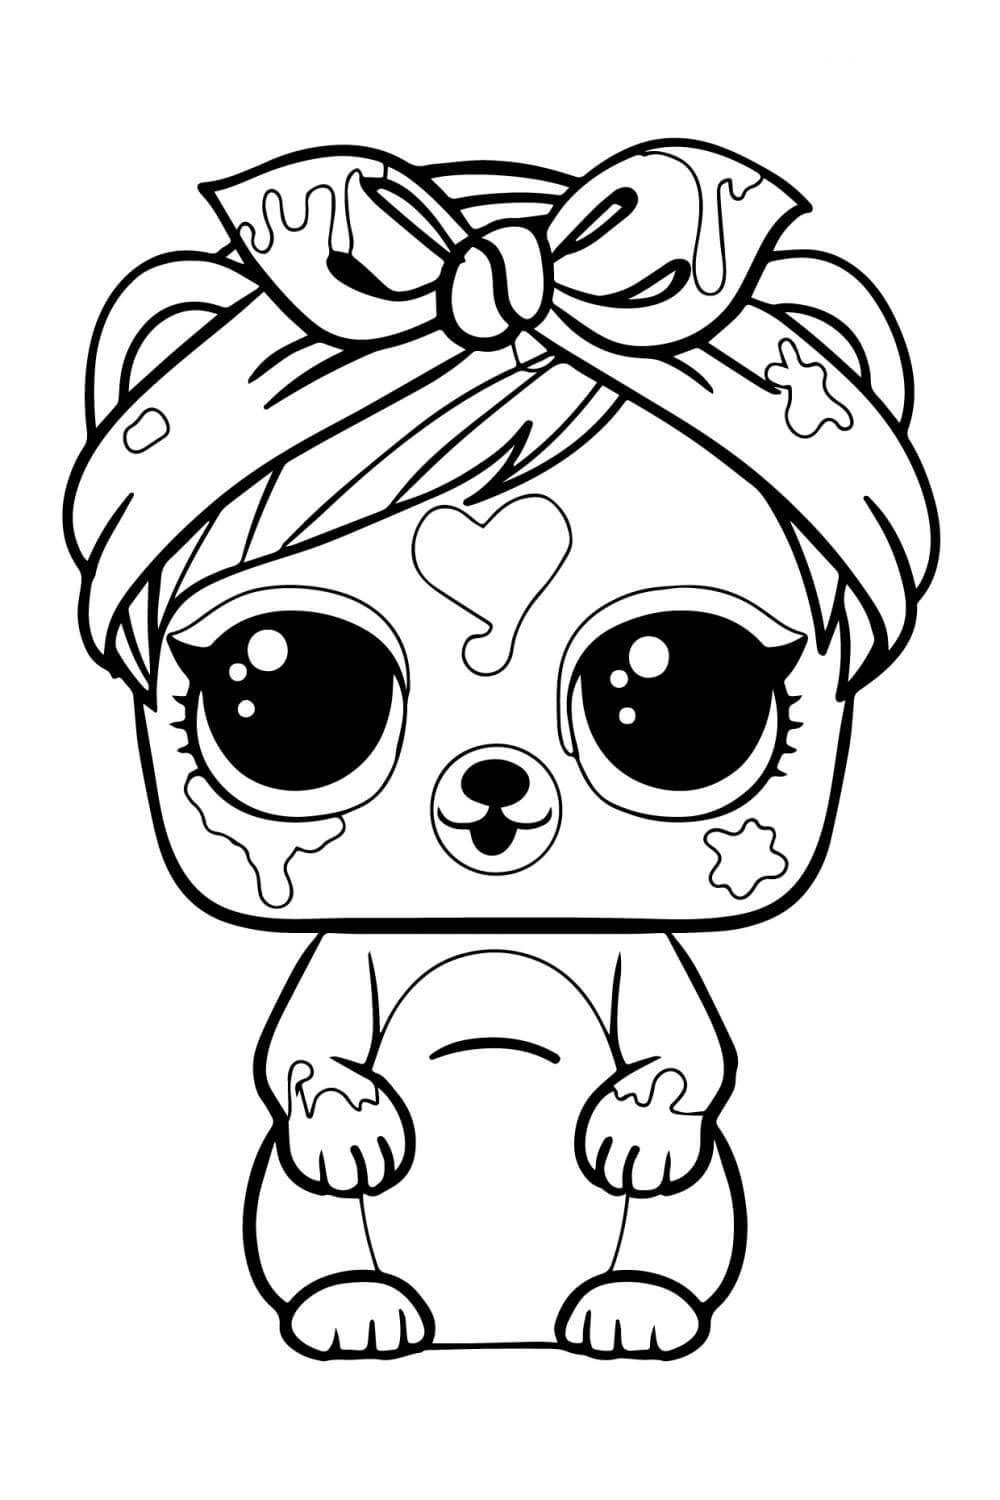 LOL Pets Hamster Coloring Page   Free Printable Coloring Pages for ...